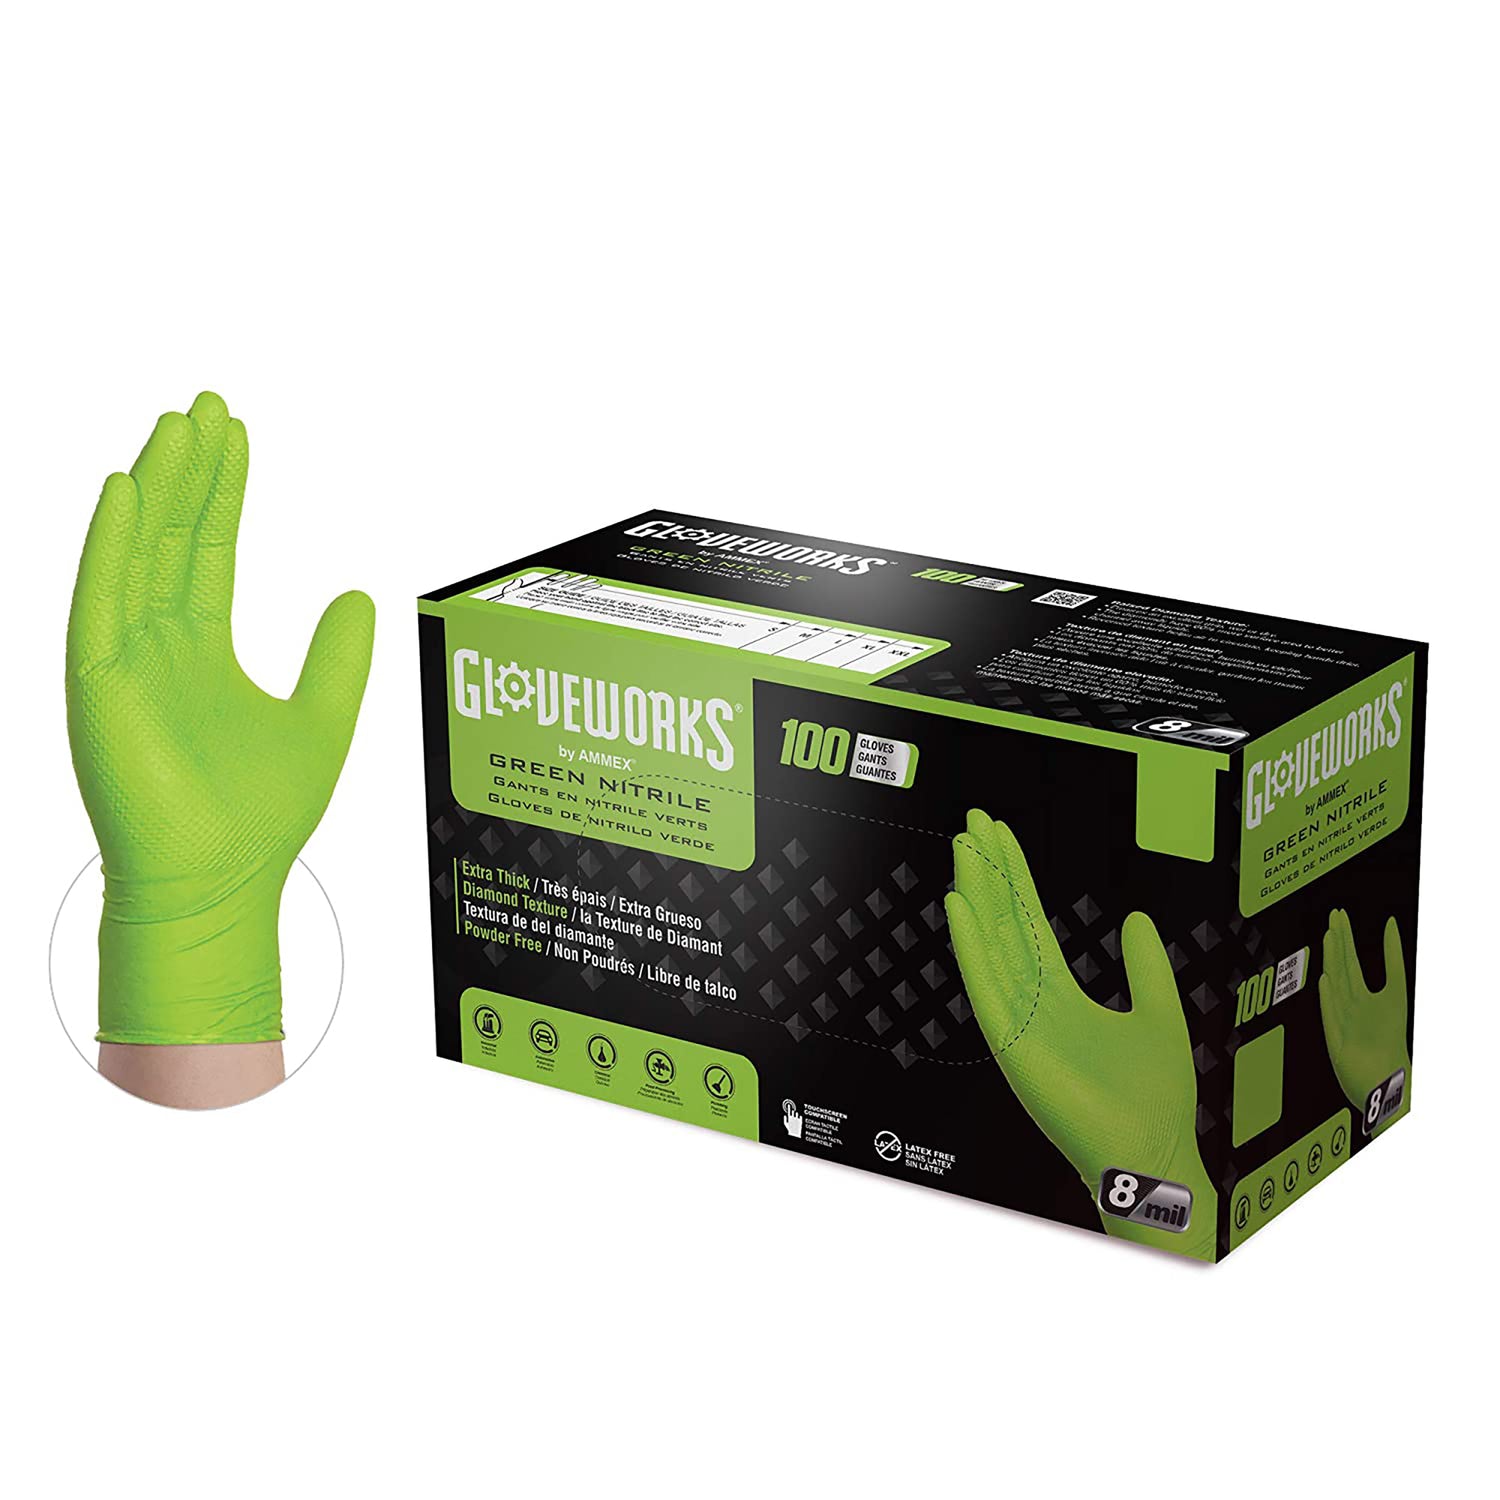 GLOVEWORK HD Green Large Nitrile 8mil Extra thick Diamond texture Powder free Gloves